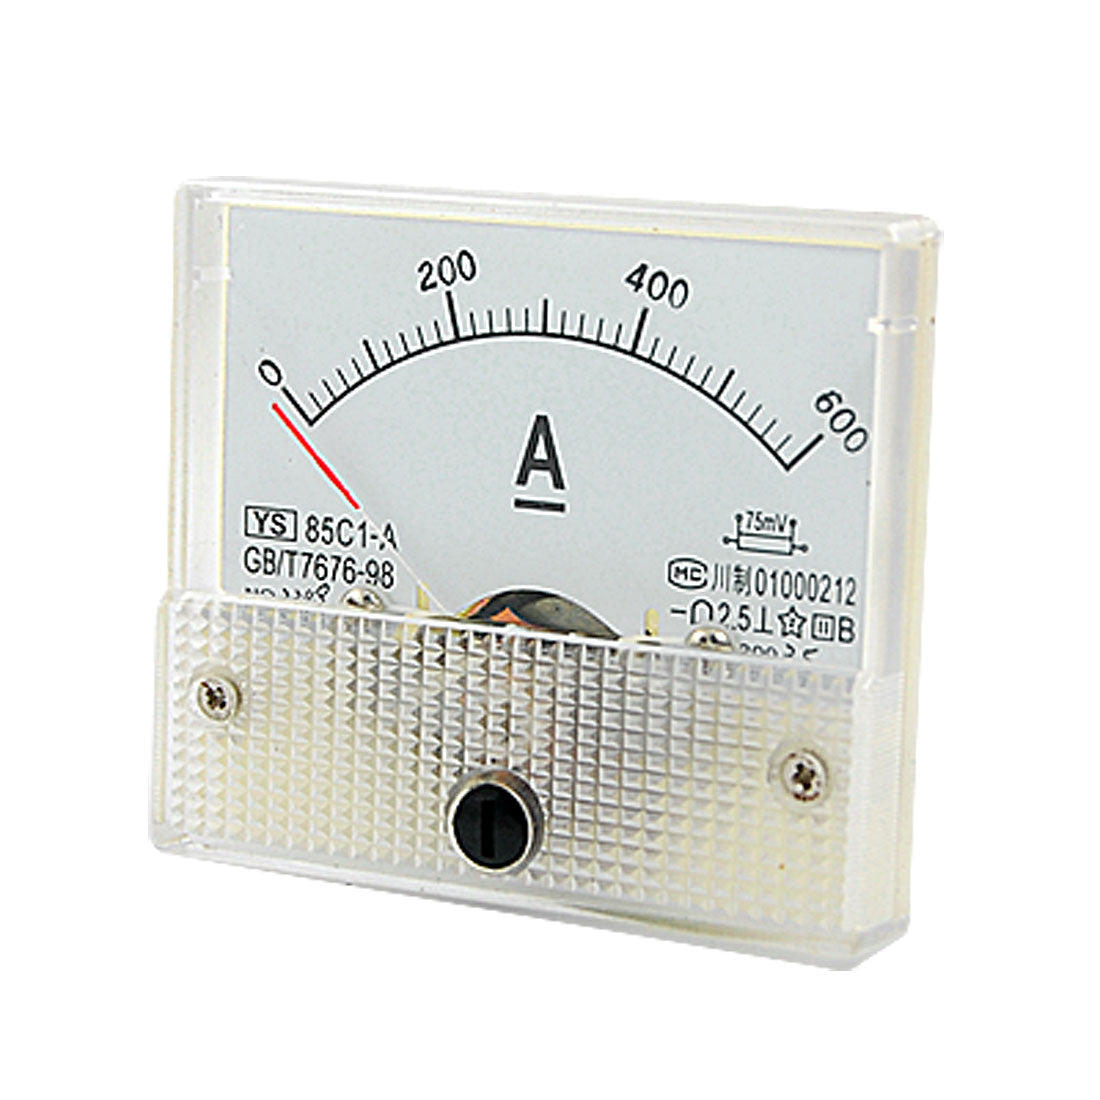 uxcell Uxcell DC 0-600A Analog Current Panel Meter Amperemeter 85C1-A